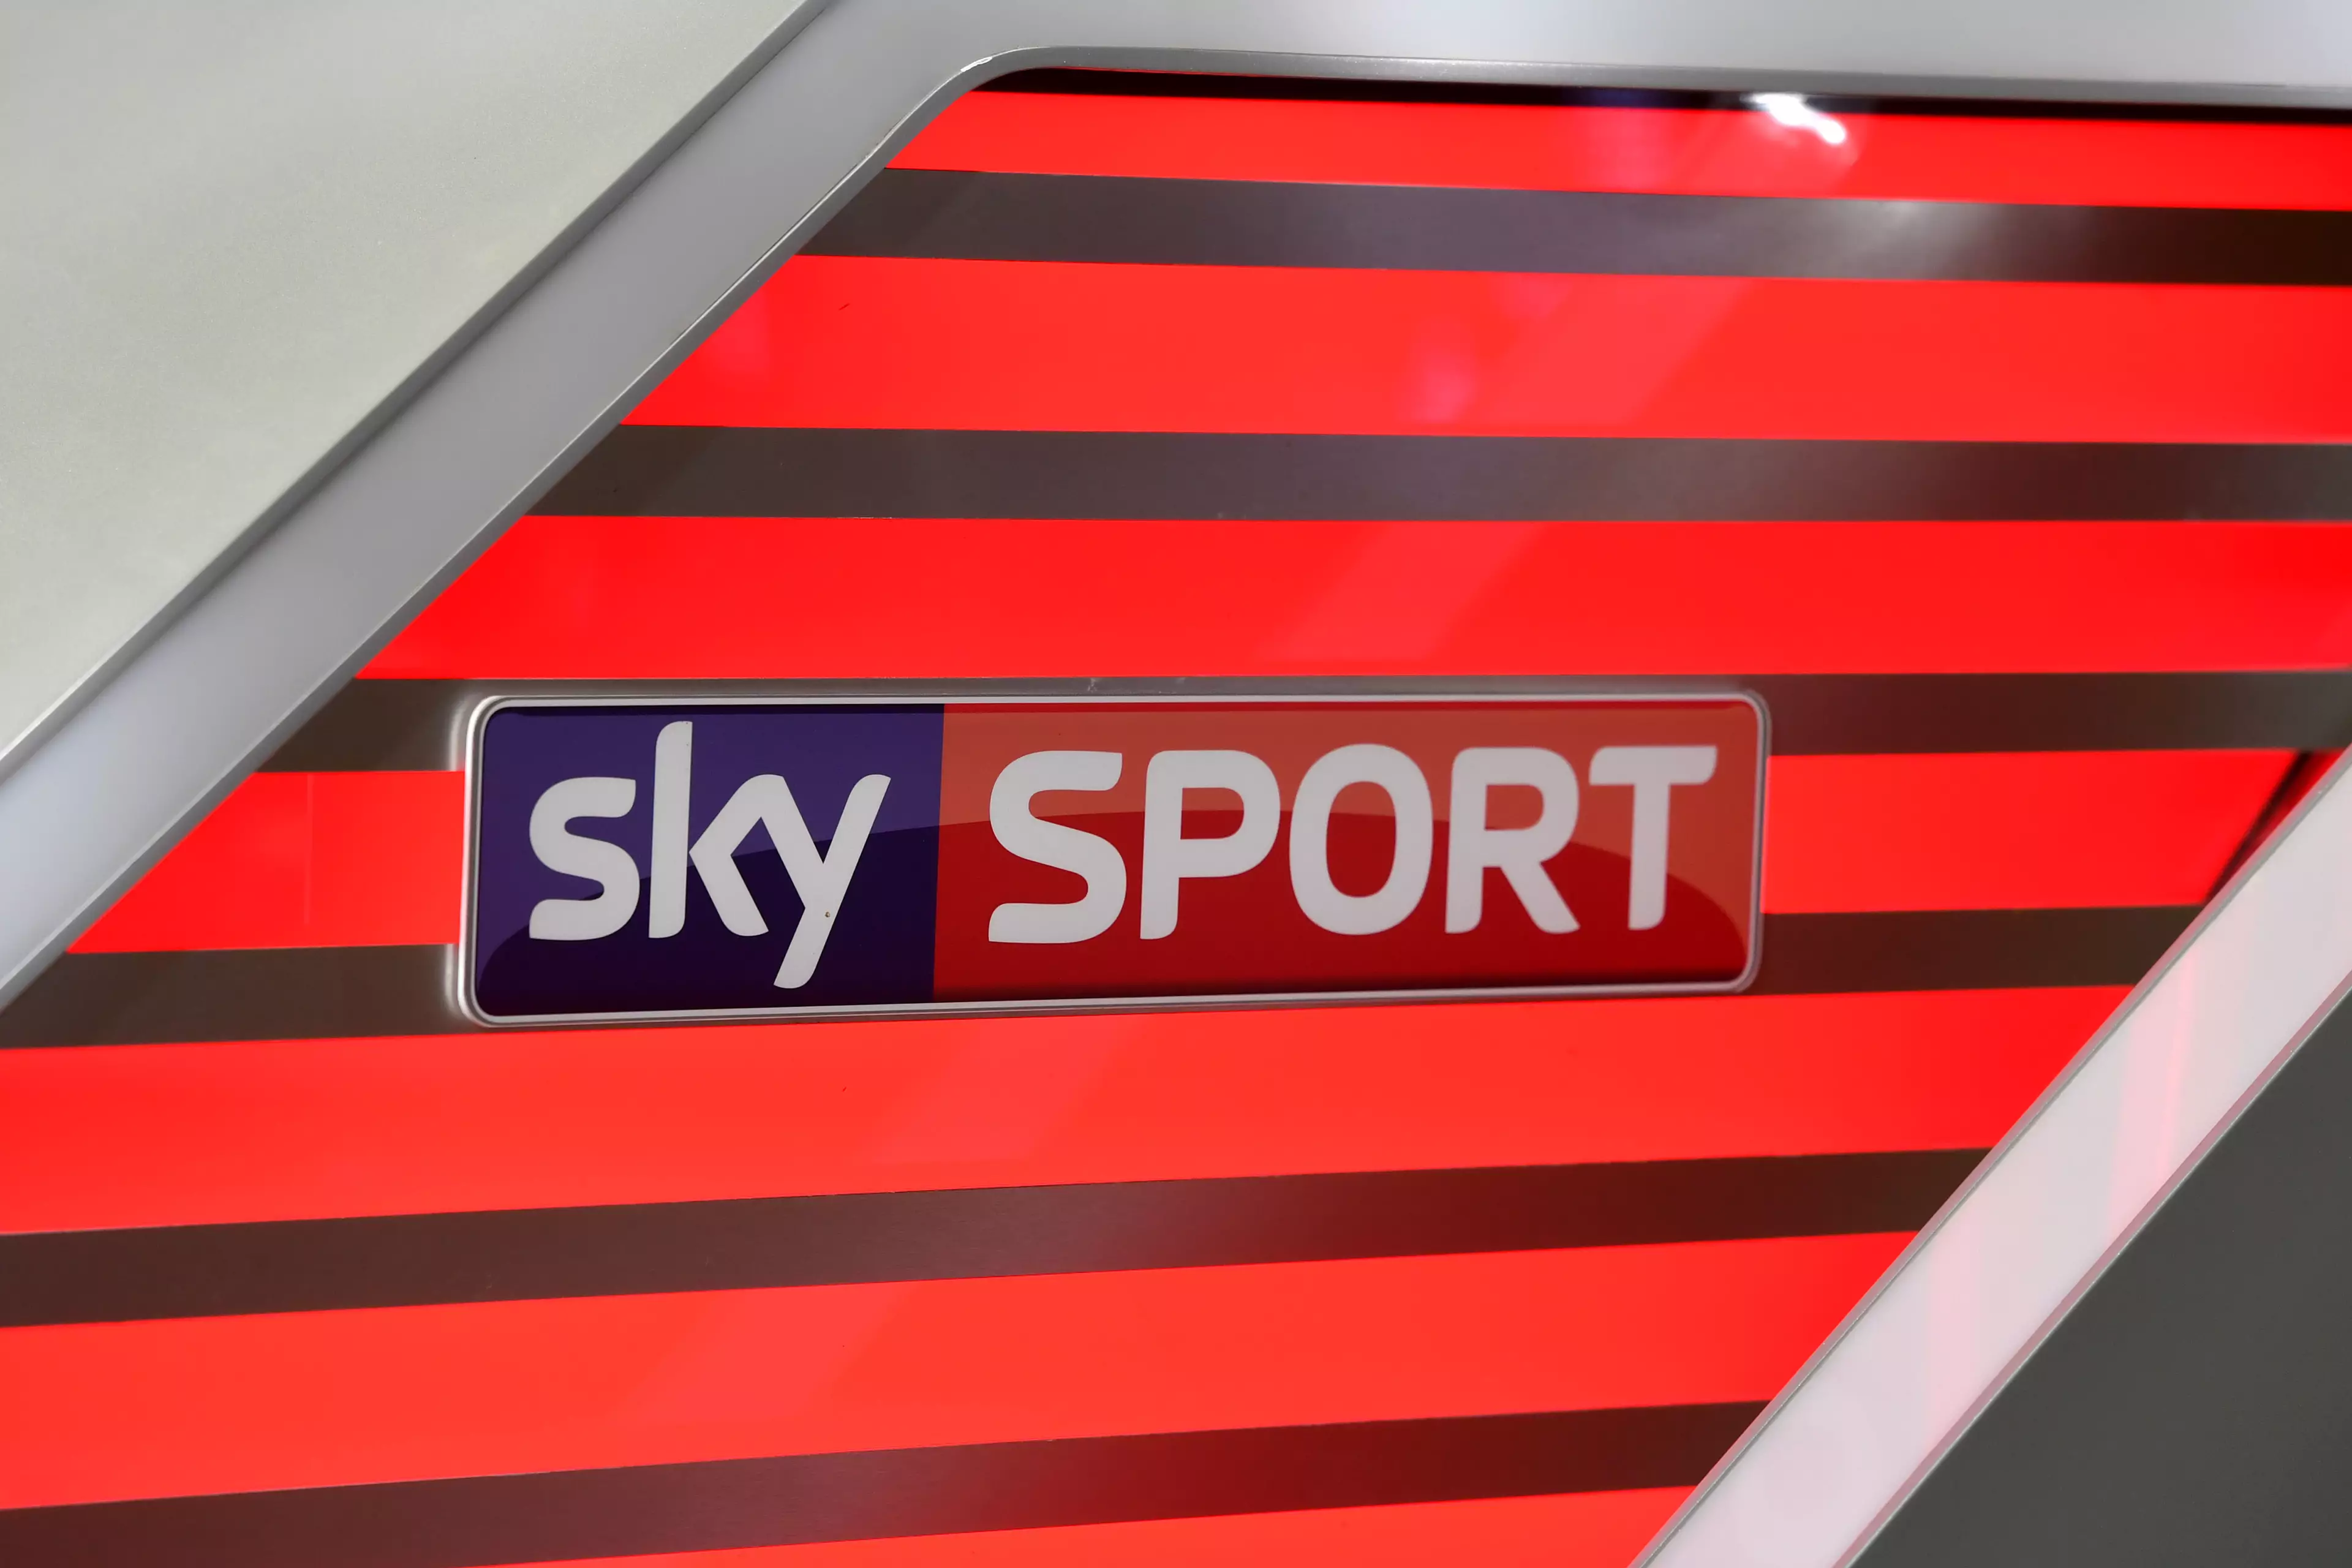 Sky Sports will carry on broadcasting on all 11 channels.